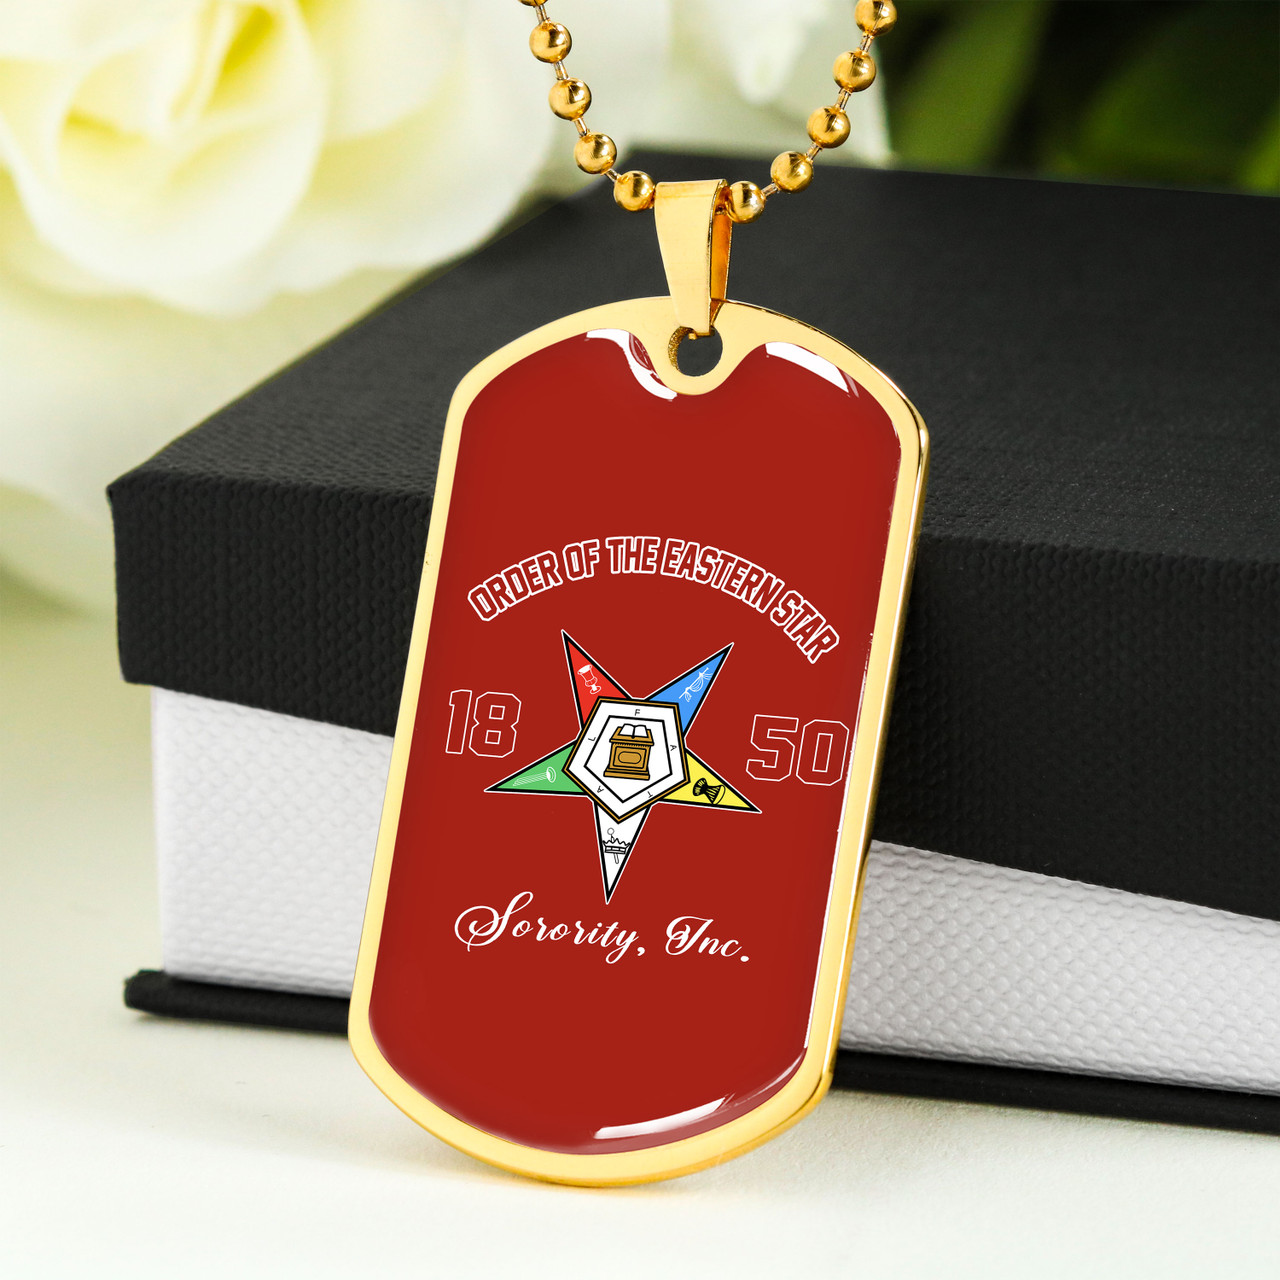 Order of the Eastern Star Military Dog Tag Necklace Sorority